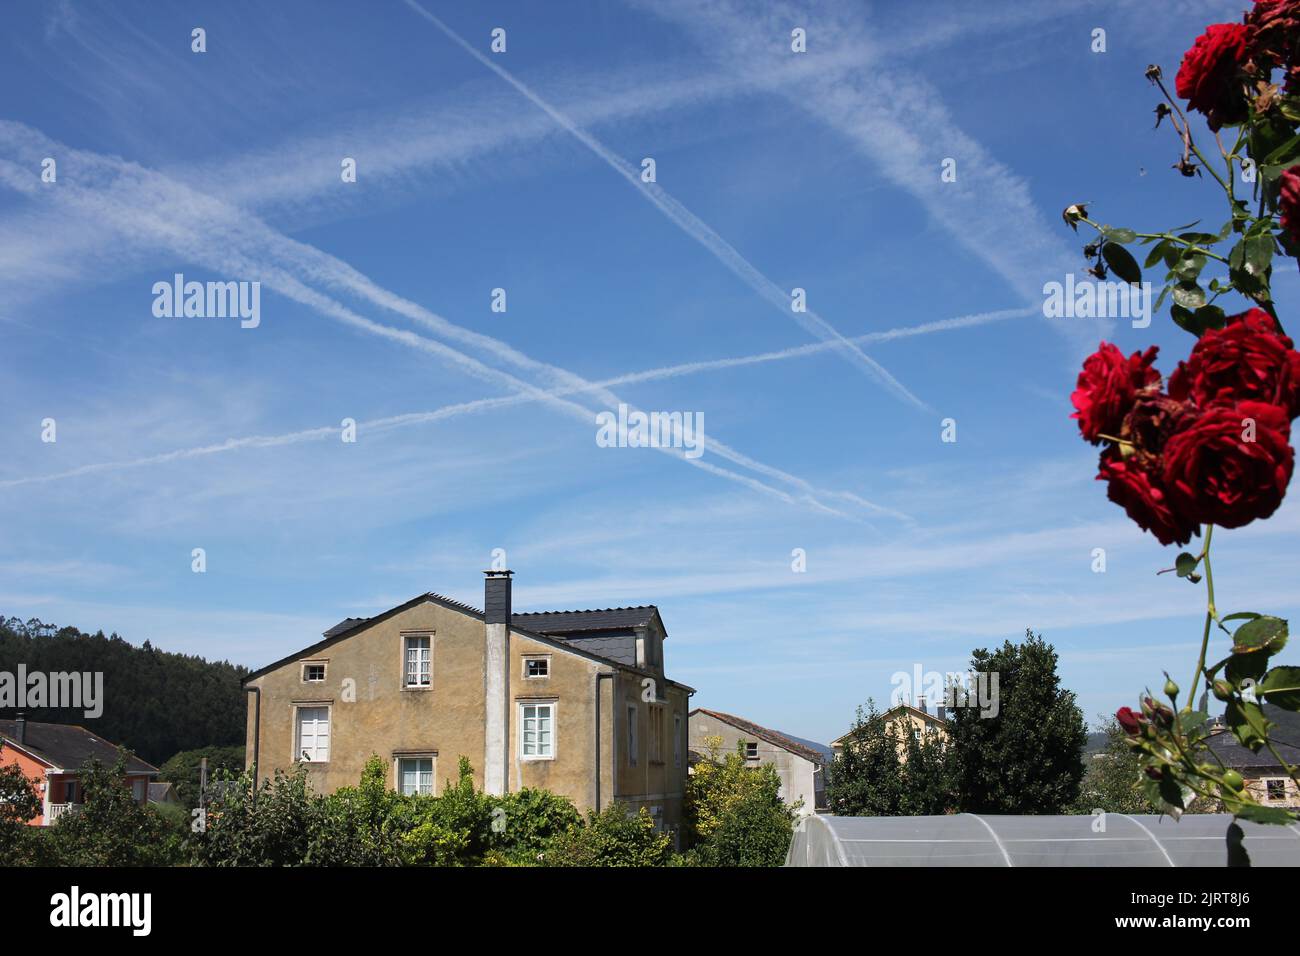 chemtrail and roses in a summer sky Stock Photo